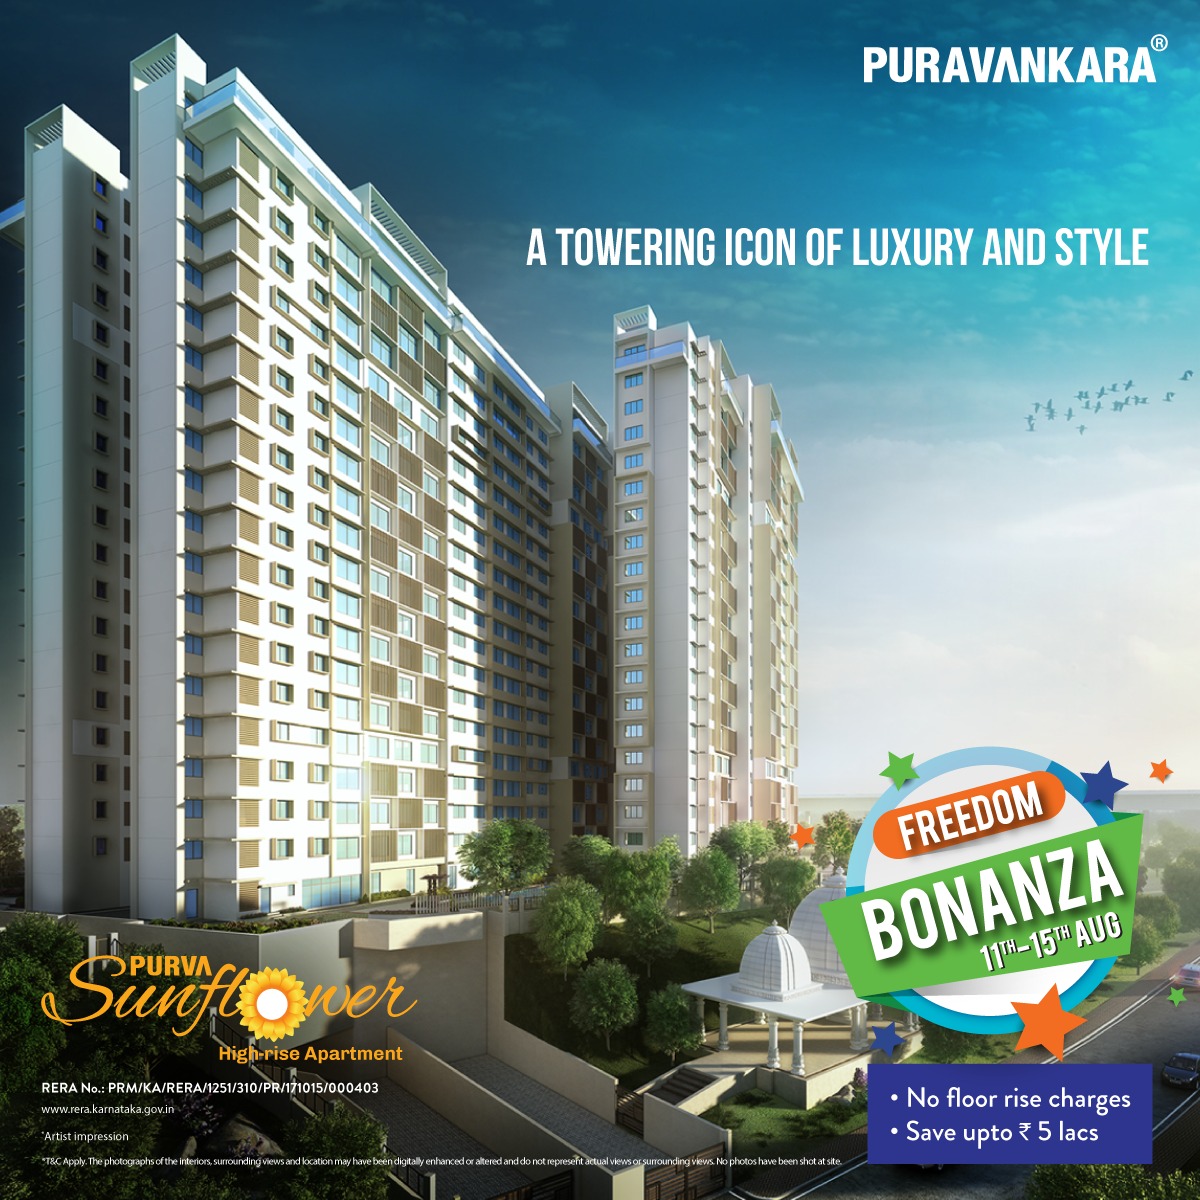 Book home during Freedom Bonanza Offer at Purva Sunflower in Bangalore Update